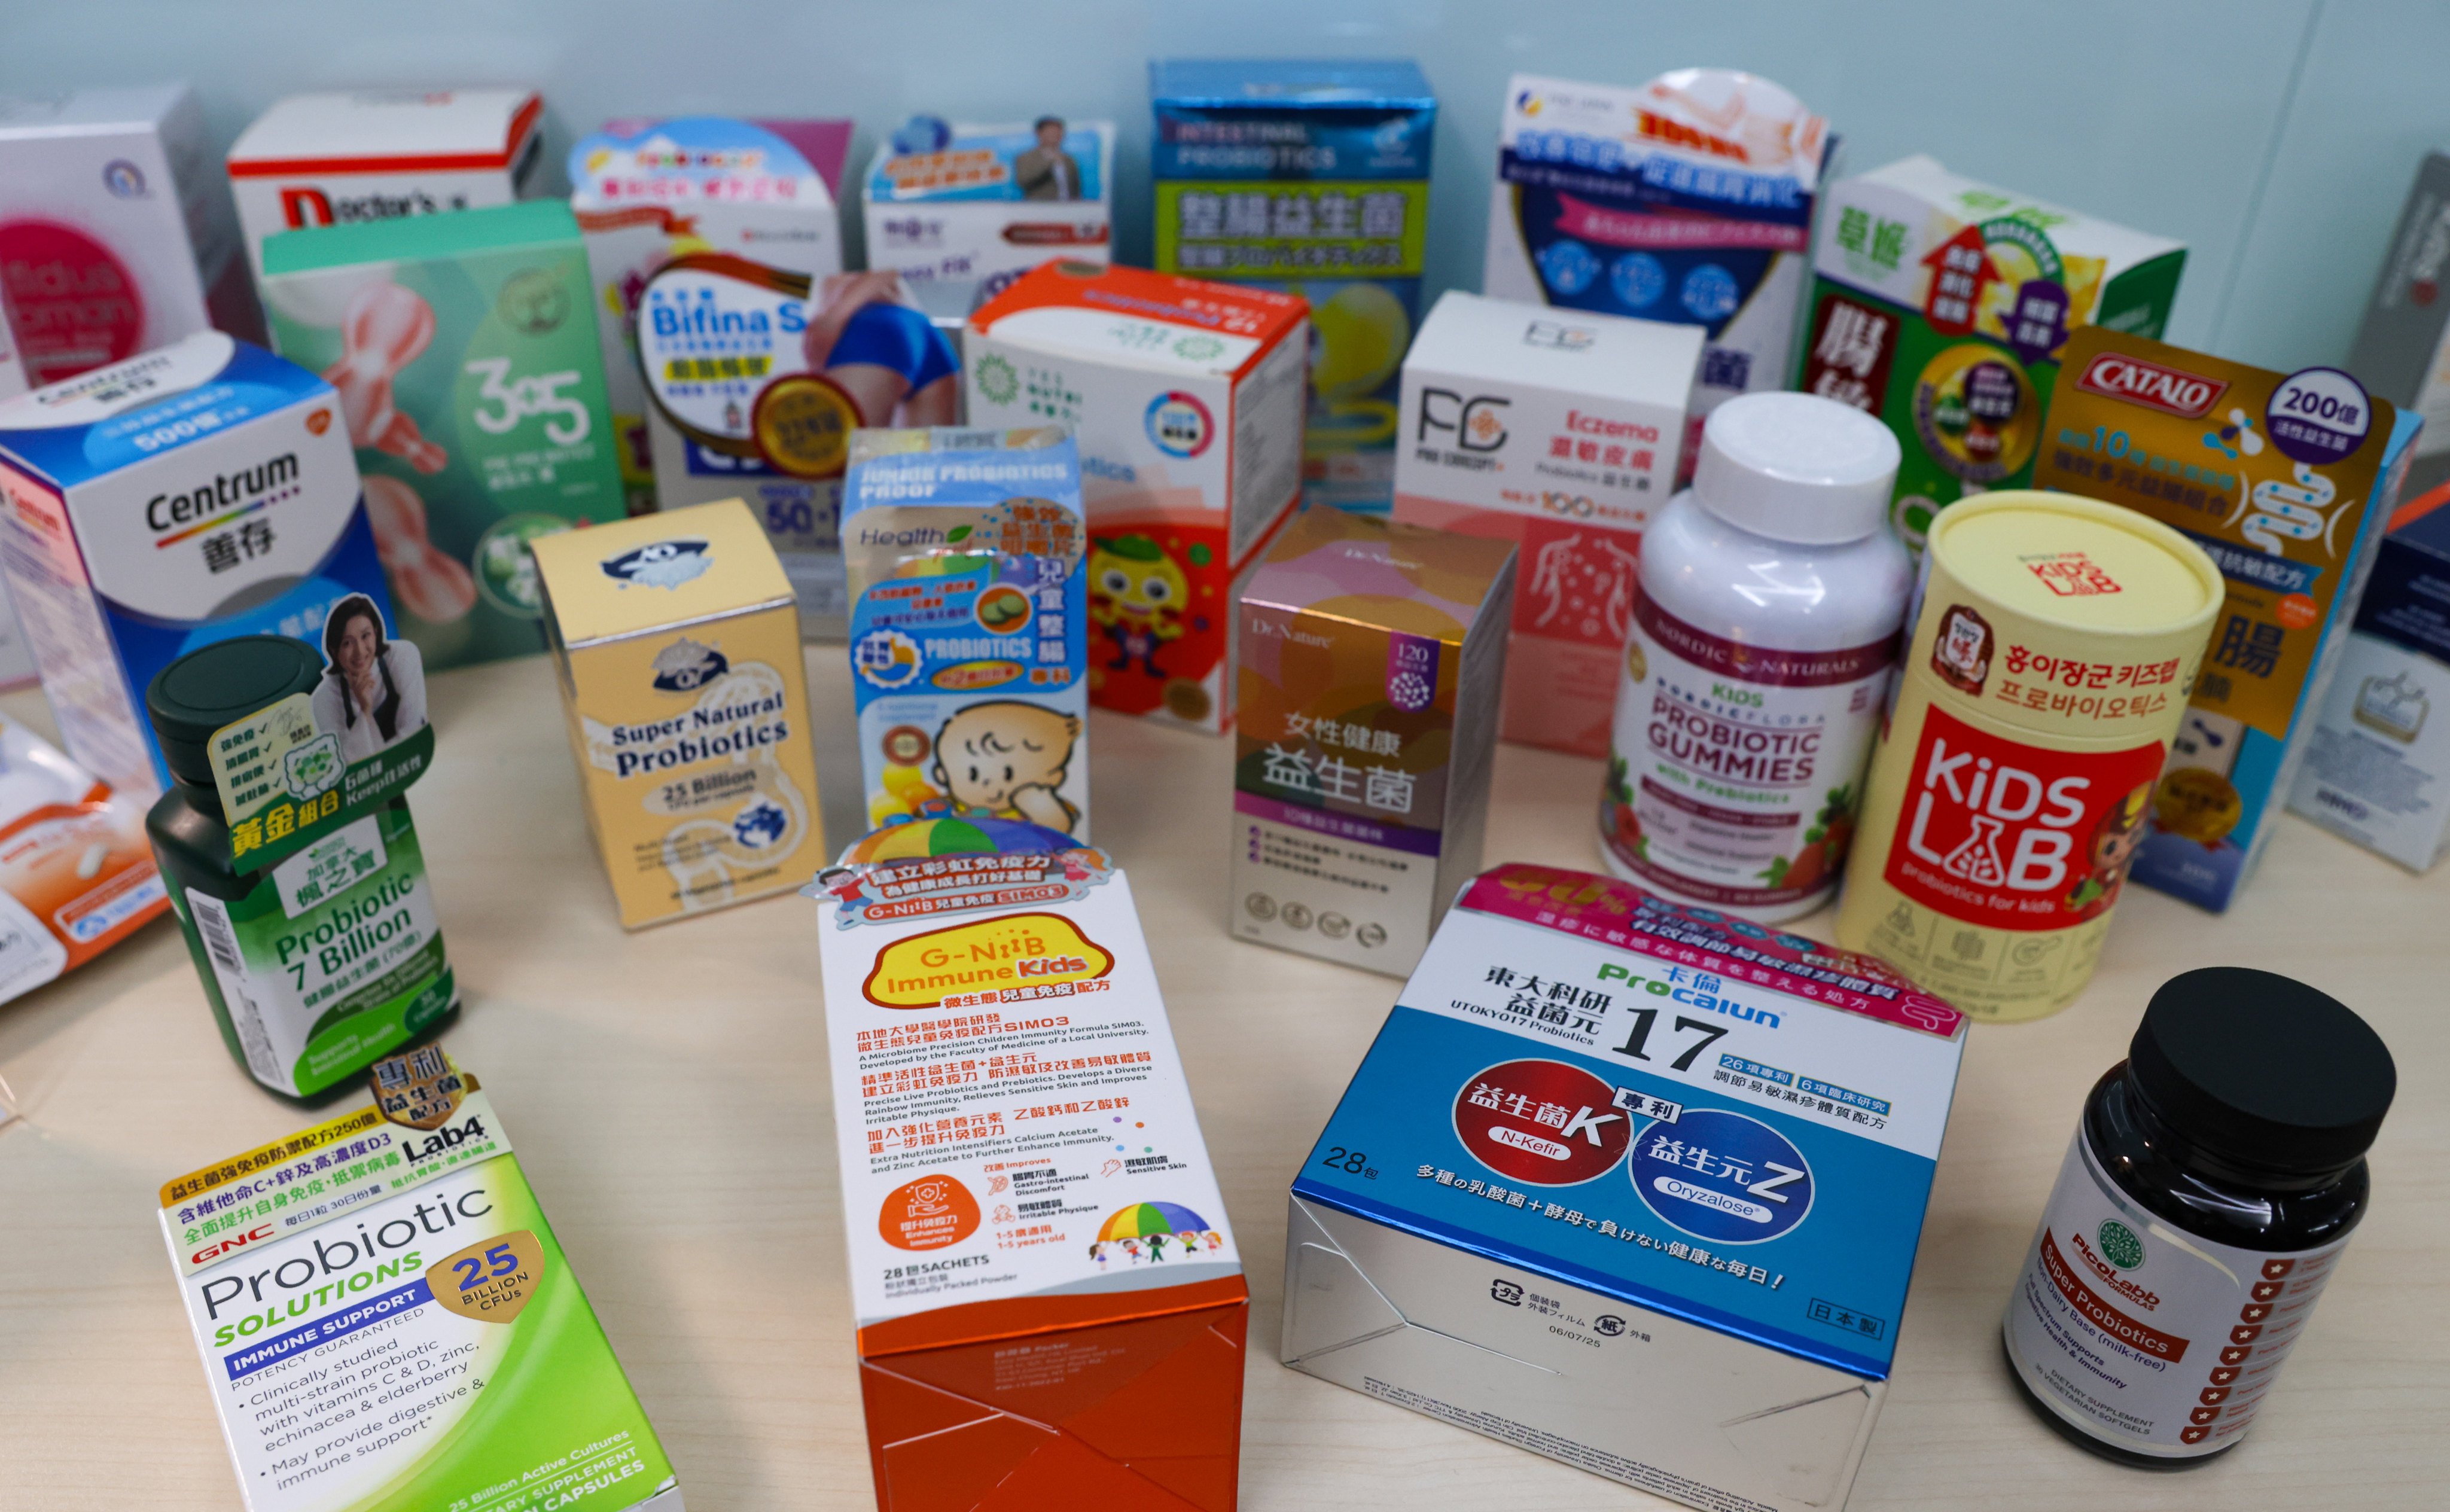 Sixty per cent of 40 tested probiotic products had no clear labelling of the live bacteria they contained, consumer watchdog says. Photo: Yik Yeung-man